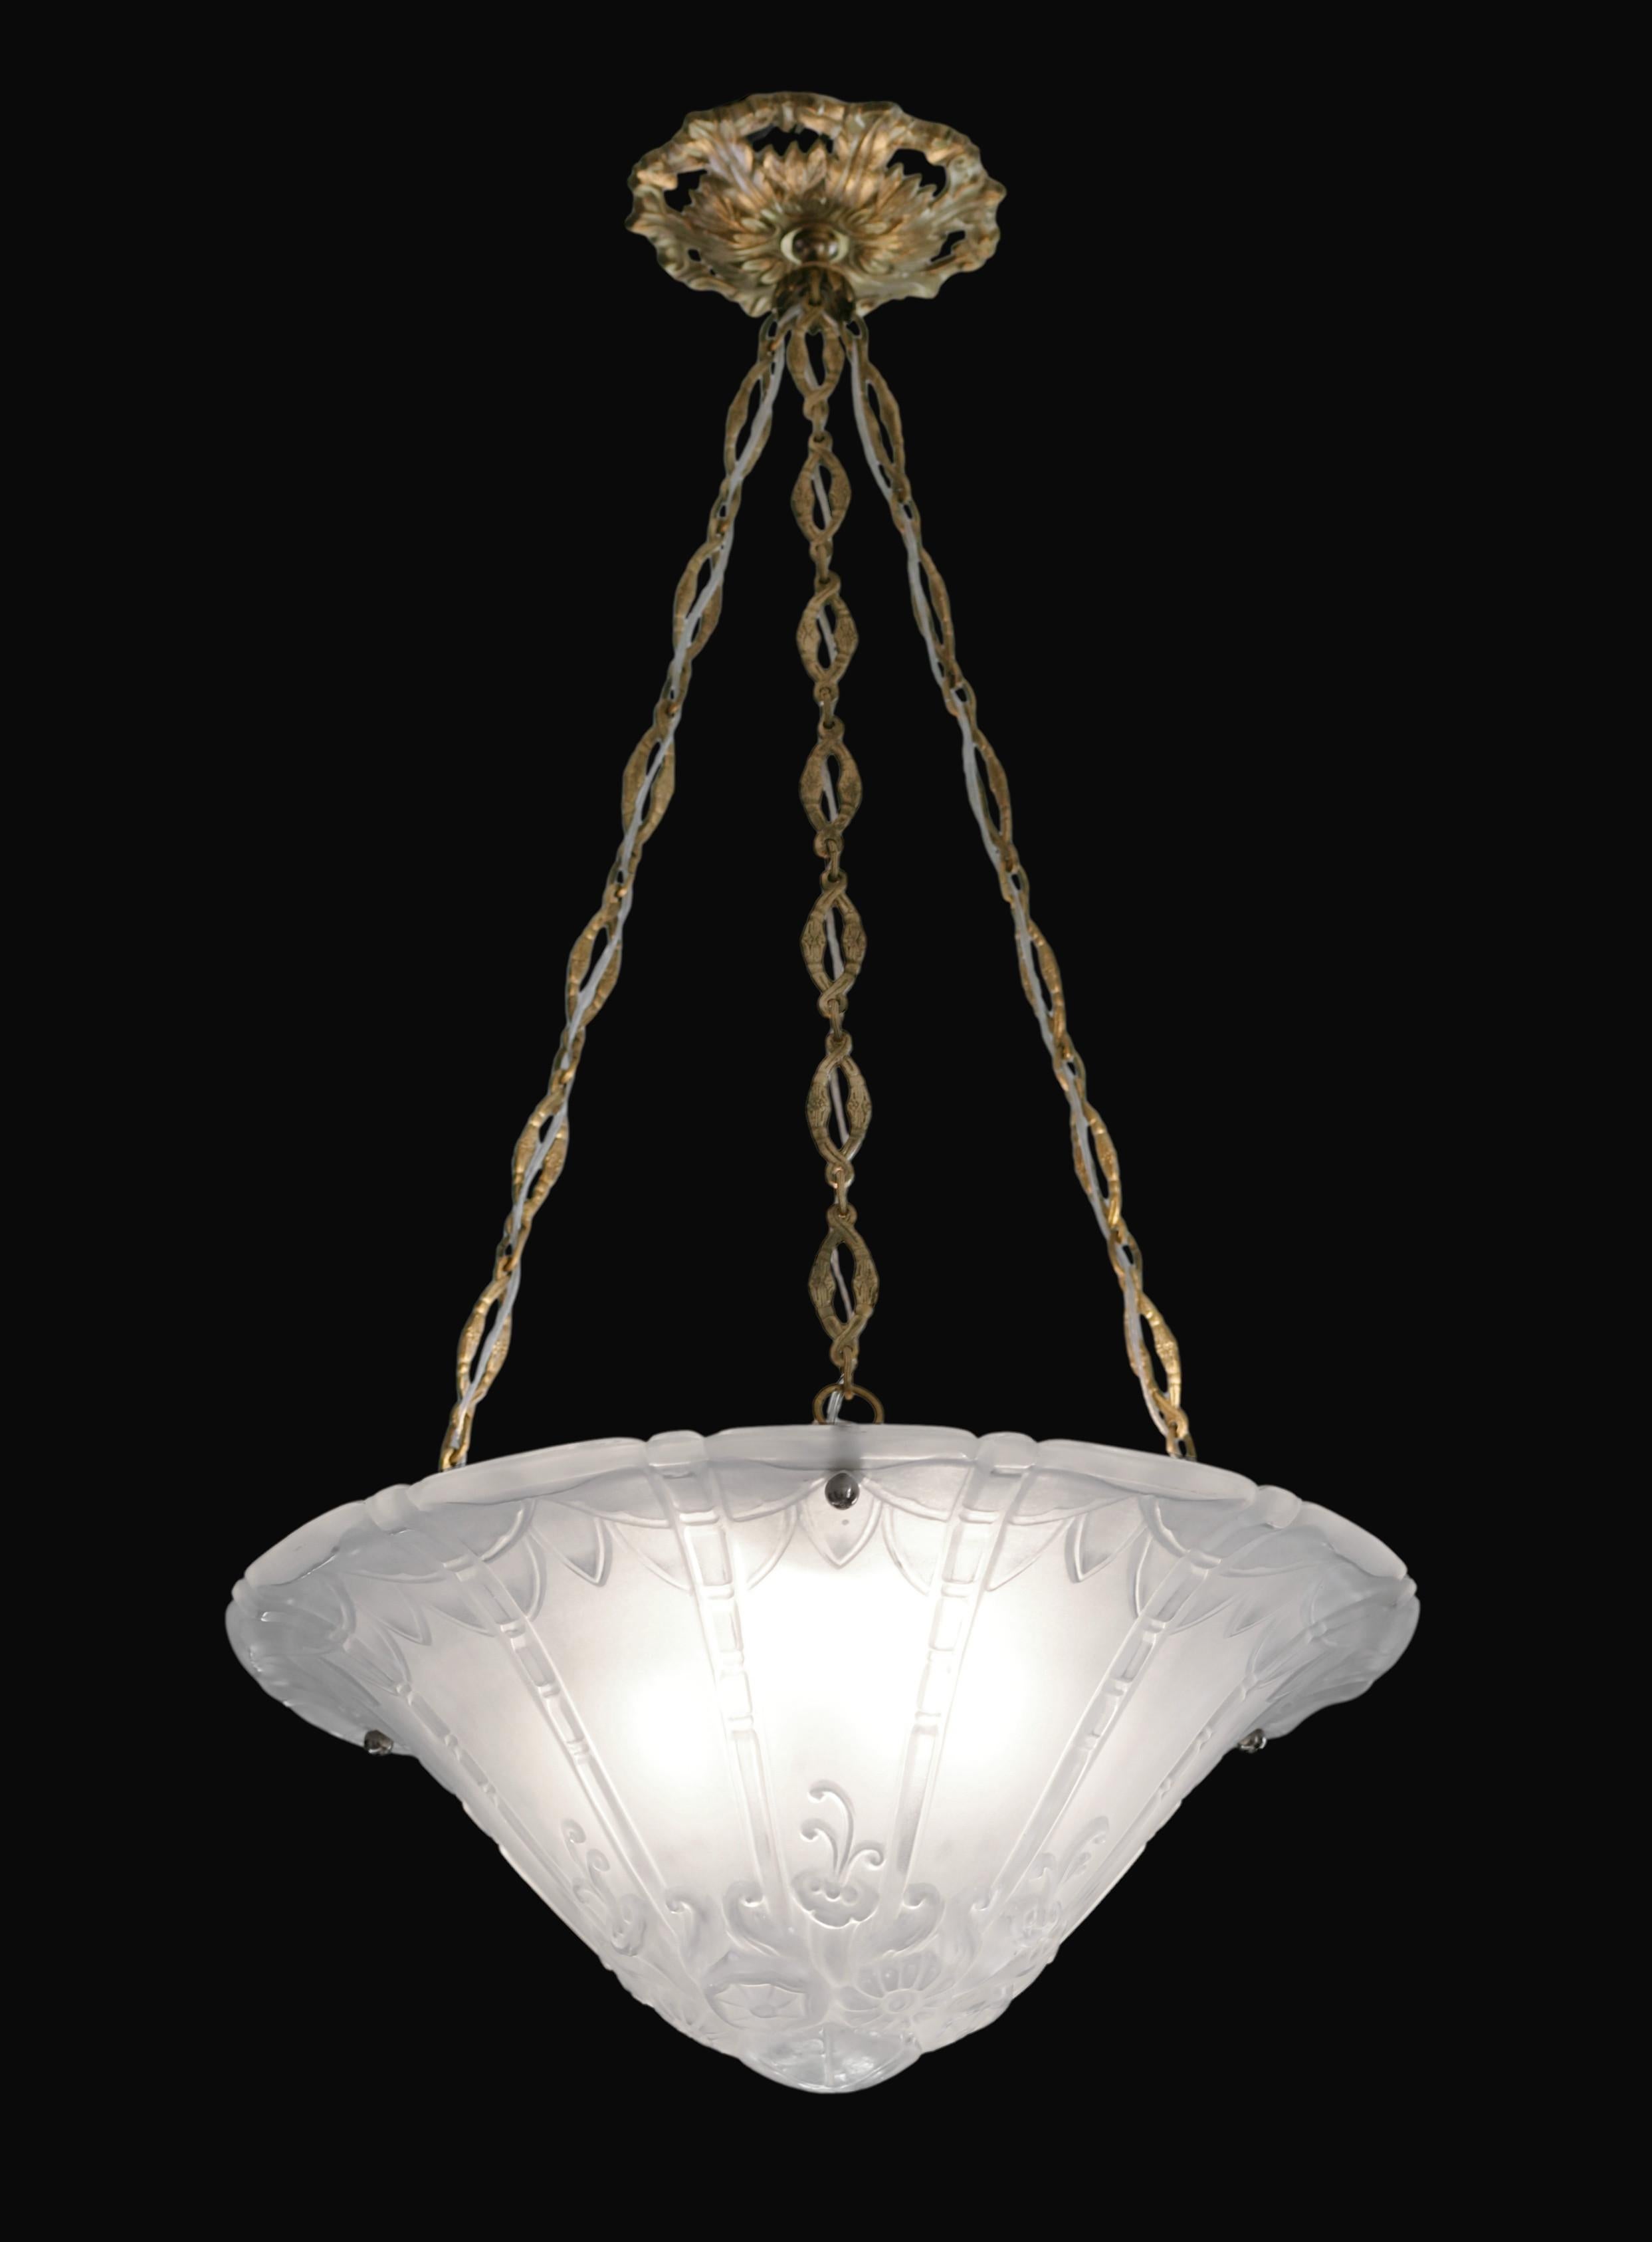 French Art Deco chandelier by Perre D'Avesn at Daum's (Croismare, Nancy), France, early 1930s. Thick molded-pressed satiny glass shade. Very well chiseled. A great model! Hung at is chiseled solid bronze. Height: 28